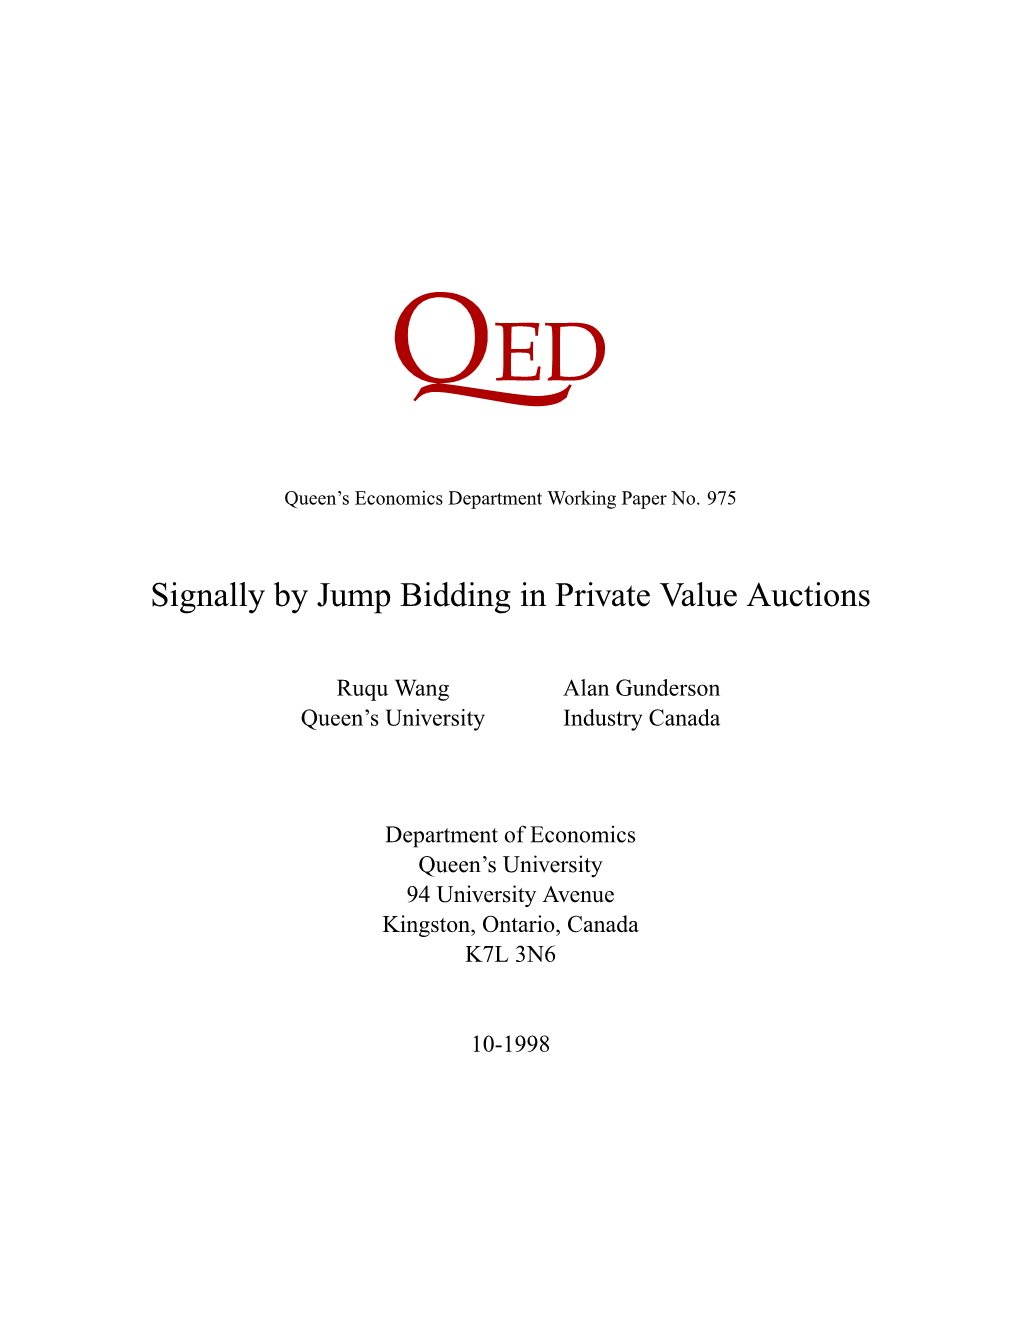 Signally by Jump Bidding in Private Value Auctions